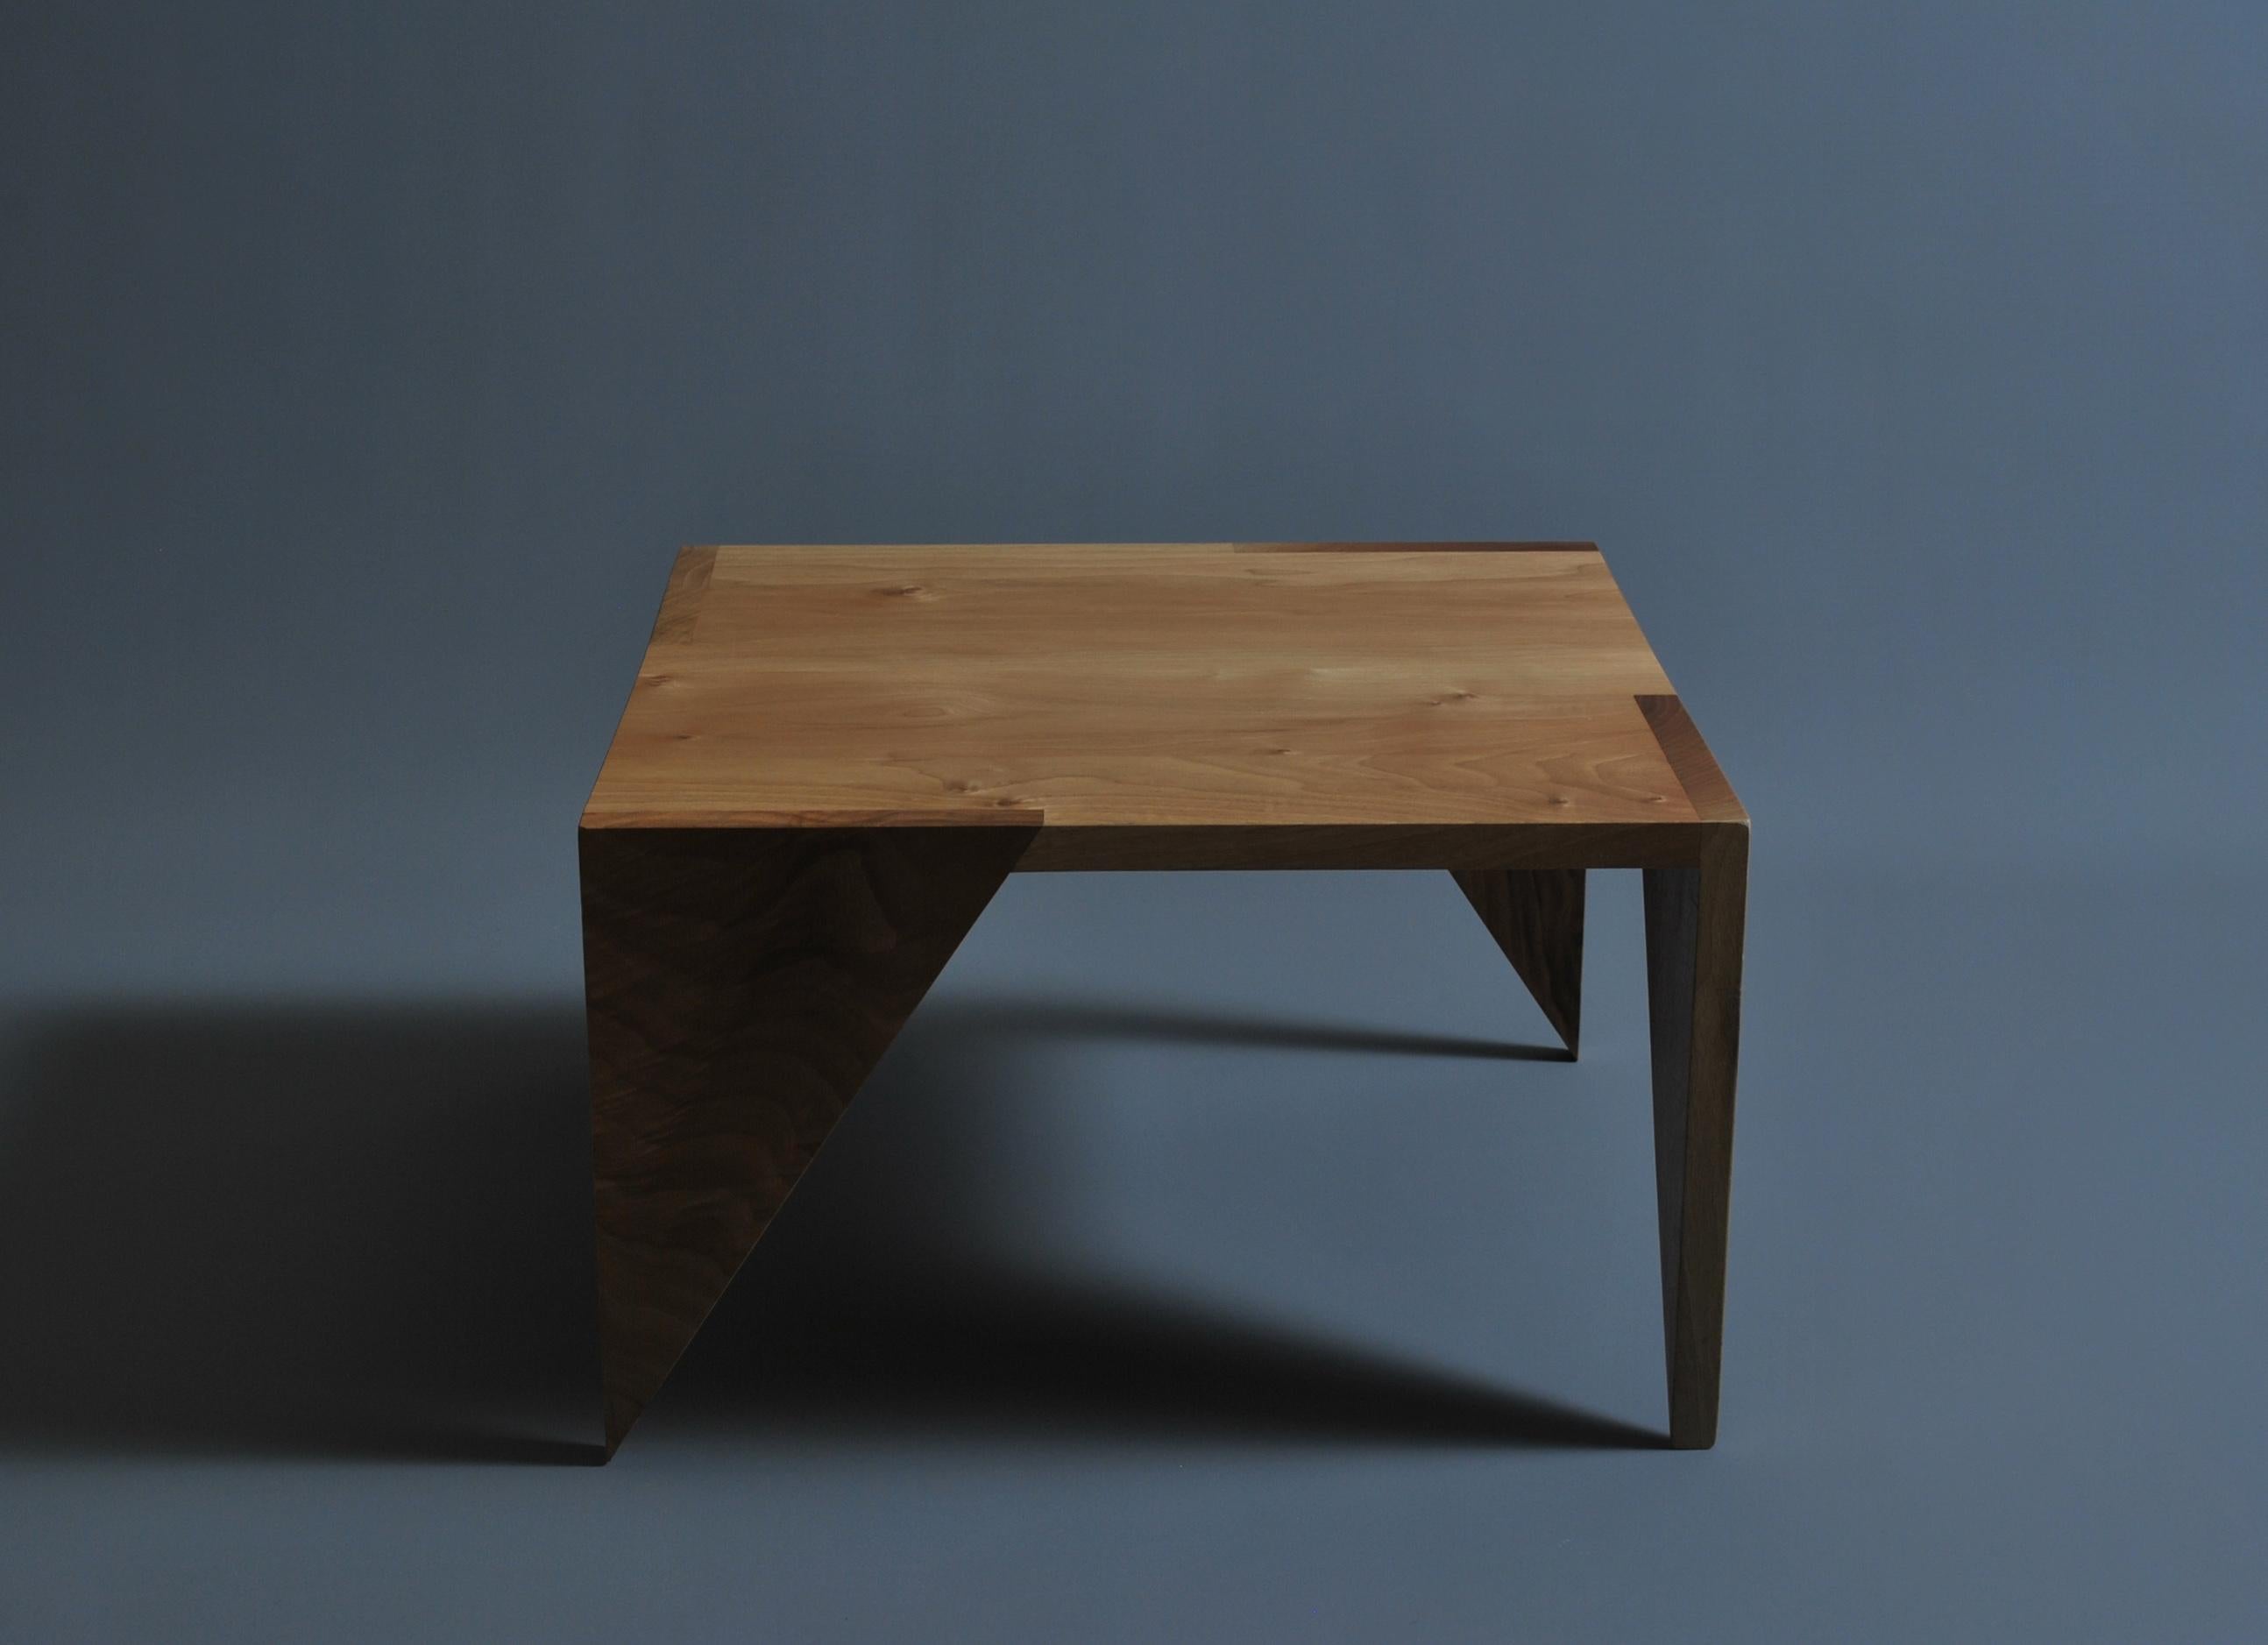 Handcrafted from the finest quality English walnut. These Postmodernist tables are acutely eye-catching but practical pieces of furniture. Bespoke handmade by master craftsmen in England and finished with water and stain resistant natural oil